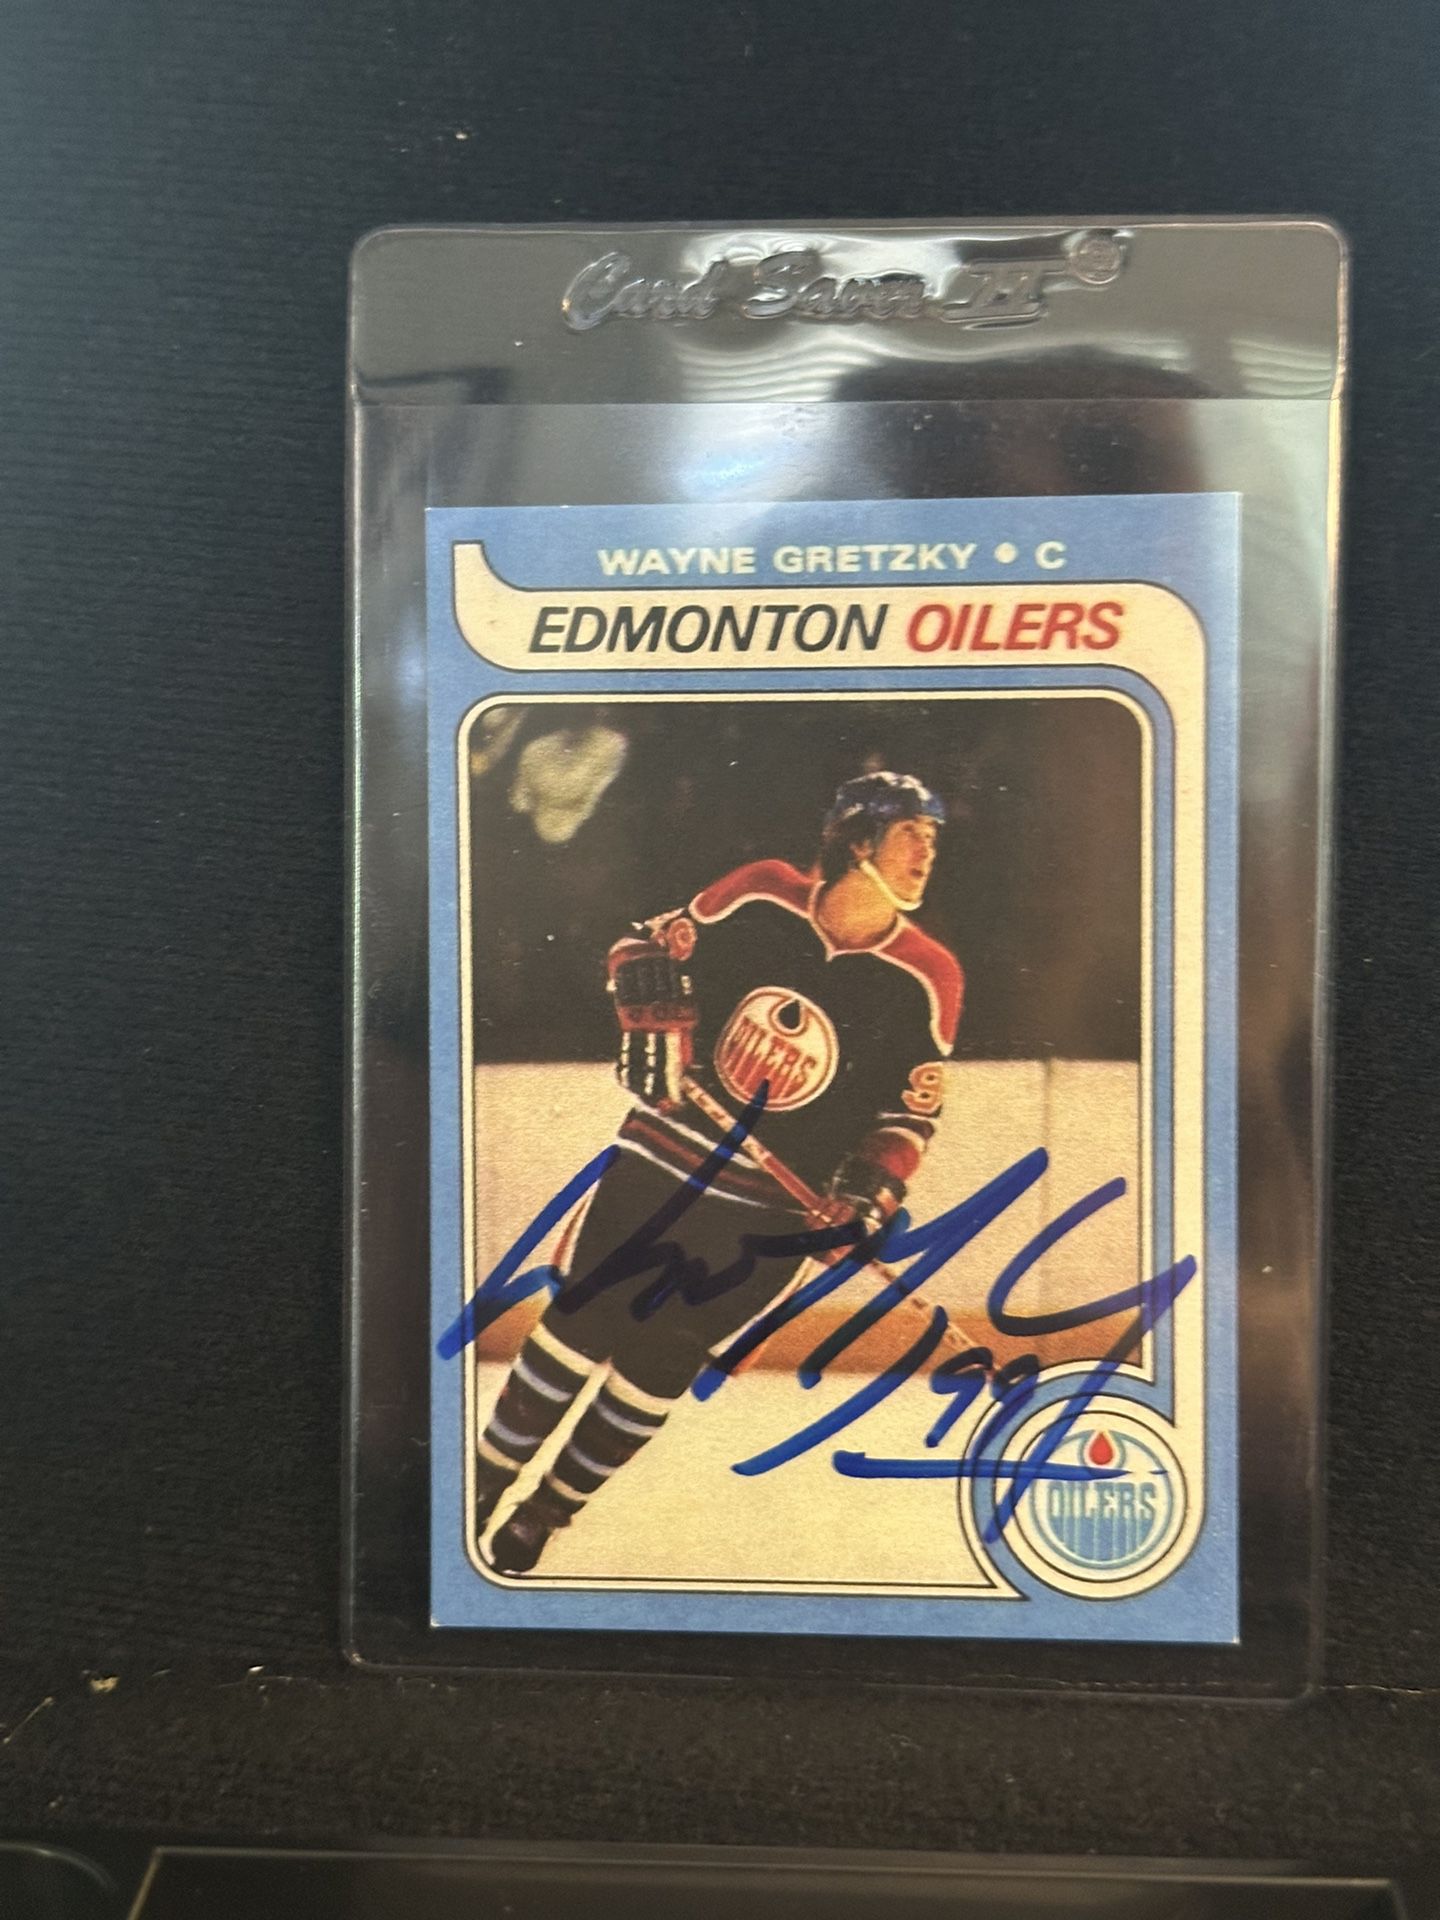 Topps 1979 R/P Of Wayne Gretzky Authentic Signature Of The Great One